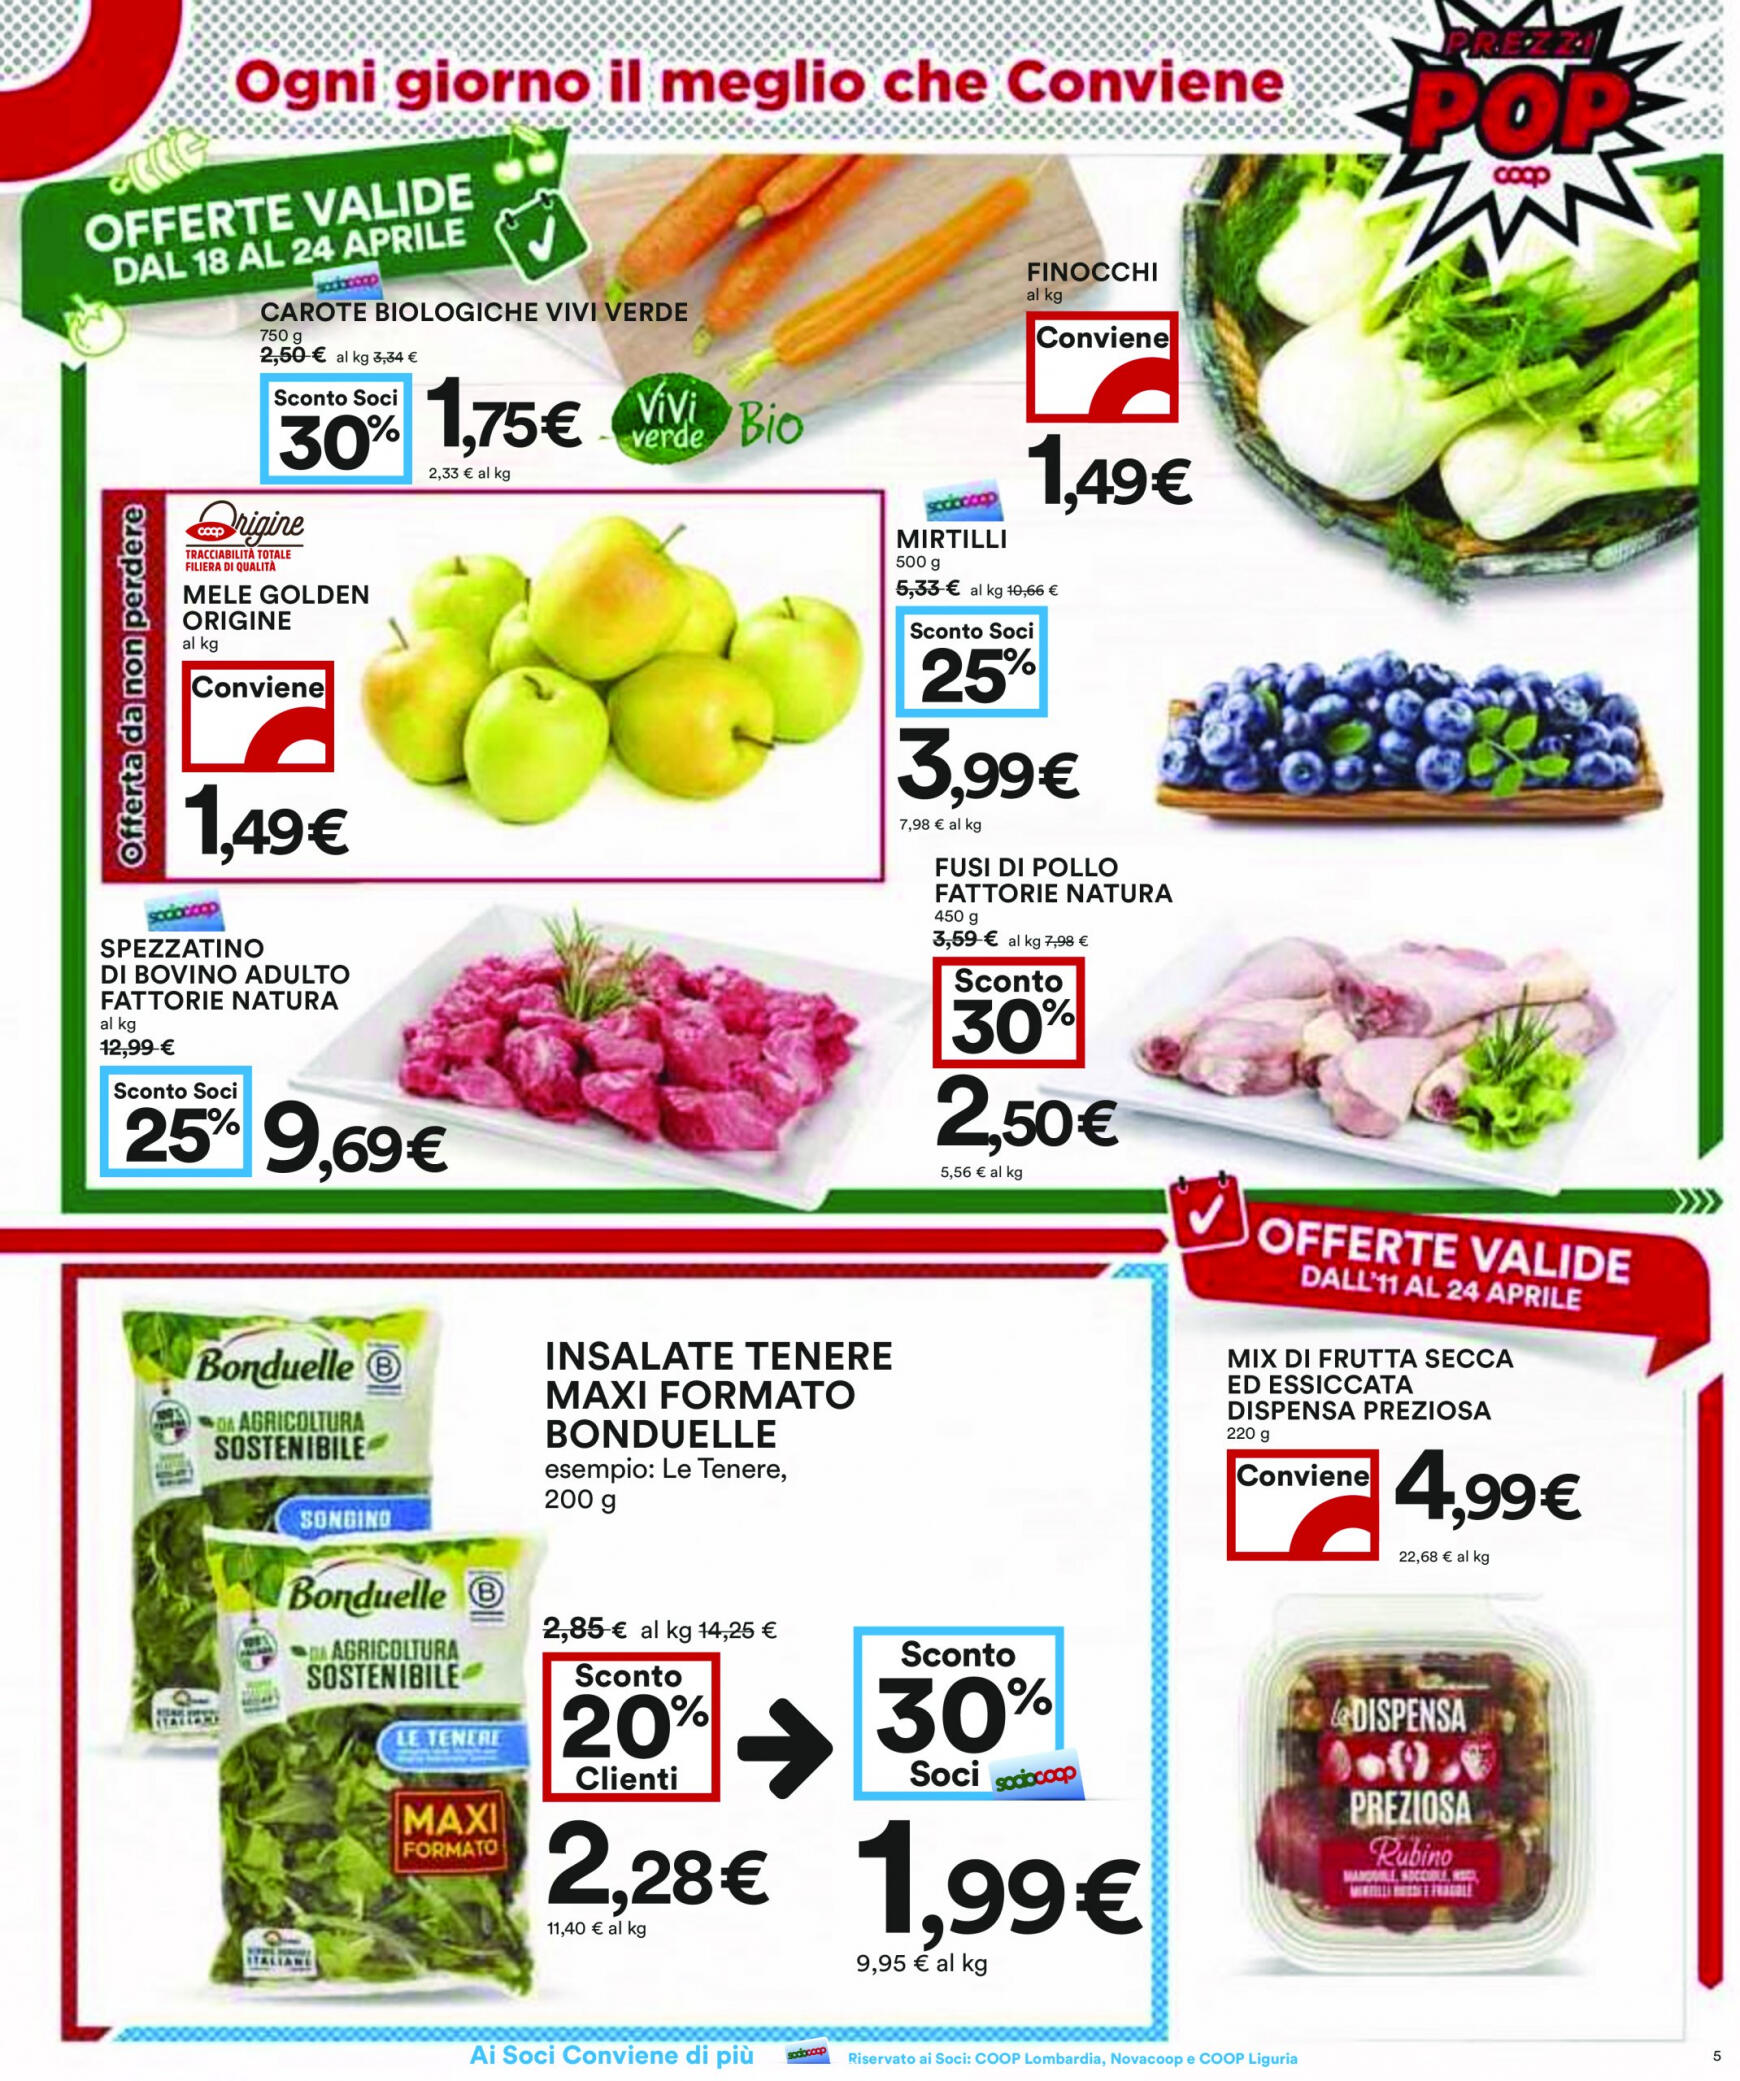 coop - Nuovo volantino Coop 11.04. - 24.04. - page: 5